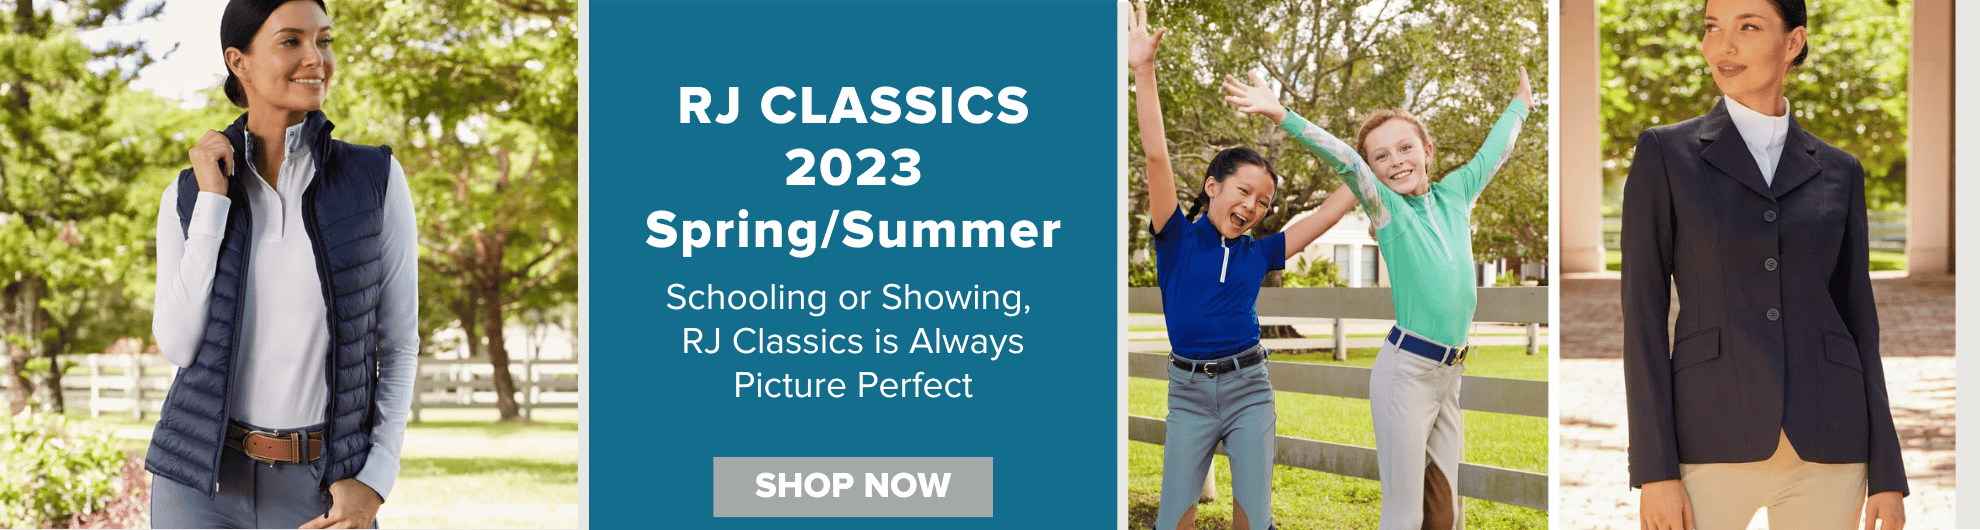 RJ Classics 2023 Spring/Summer Collection